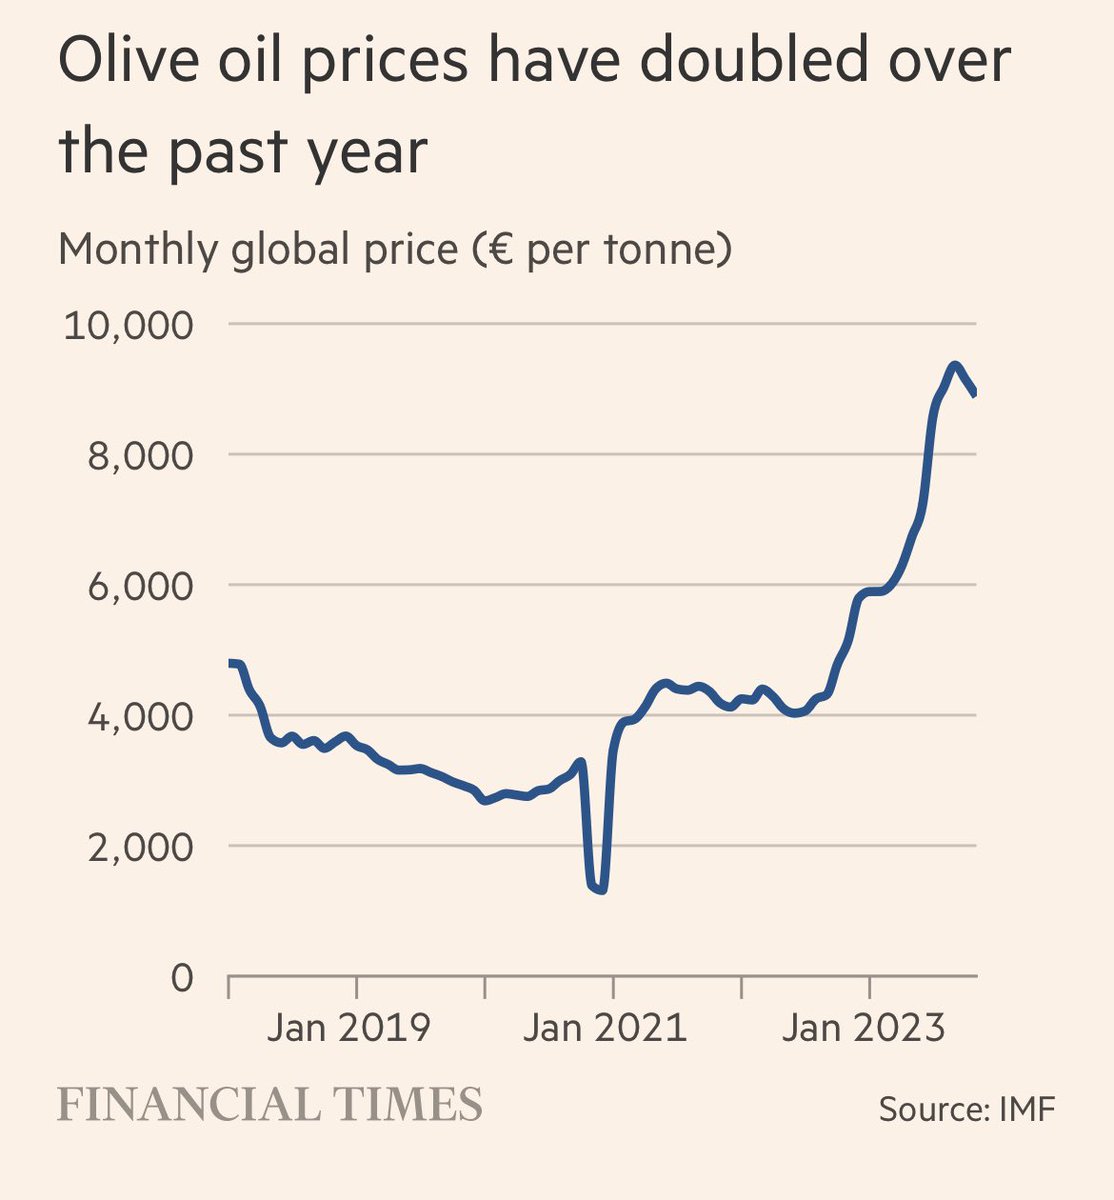 Hot weather has reduced yields all over Europe and pushed up prices of this vital health product #EVOO ⁦@FT⁩